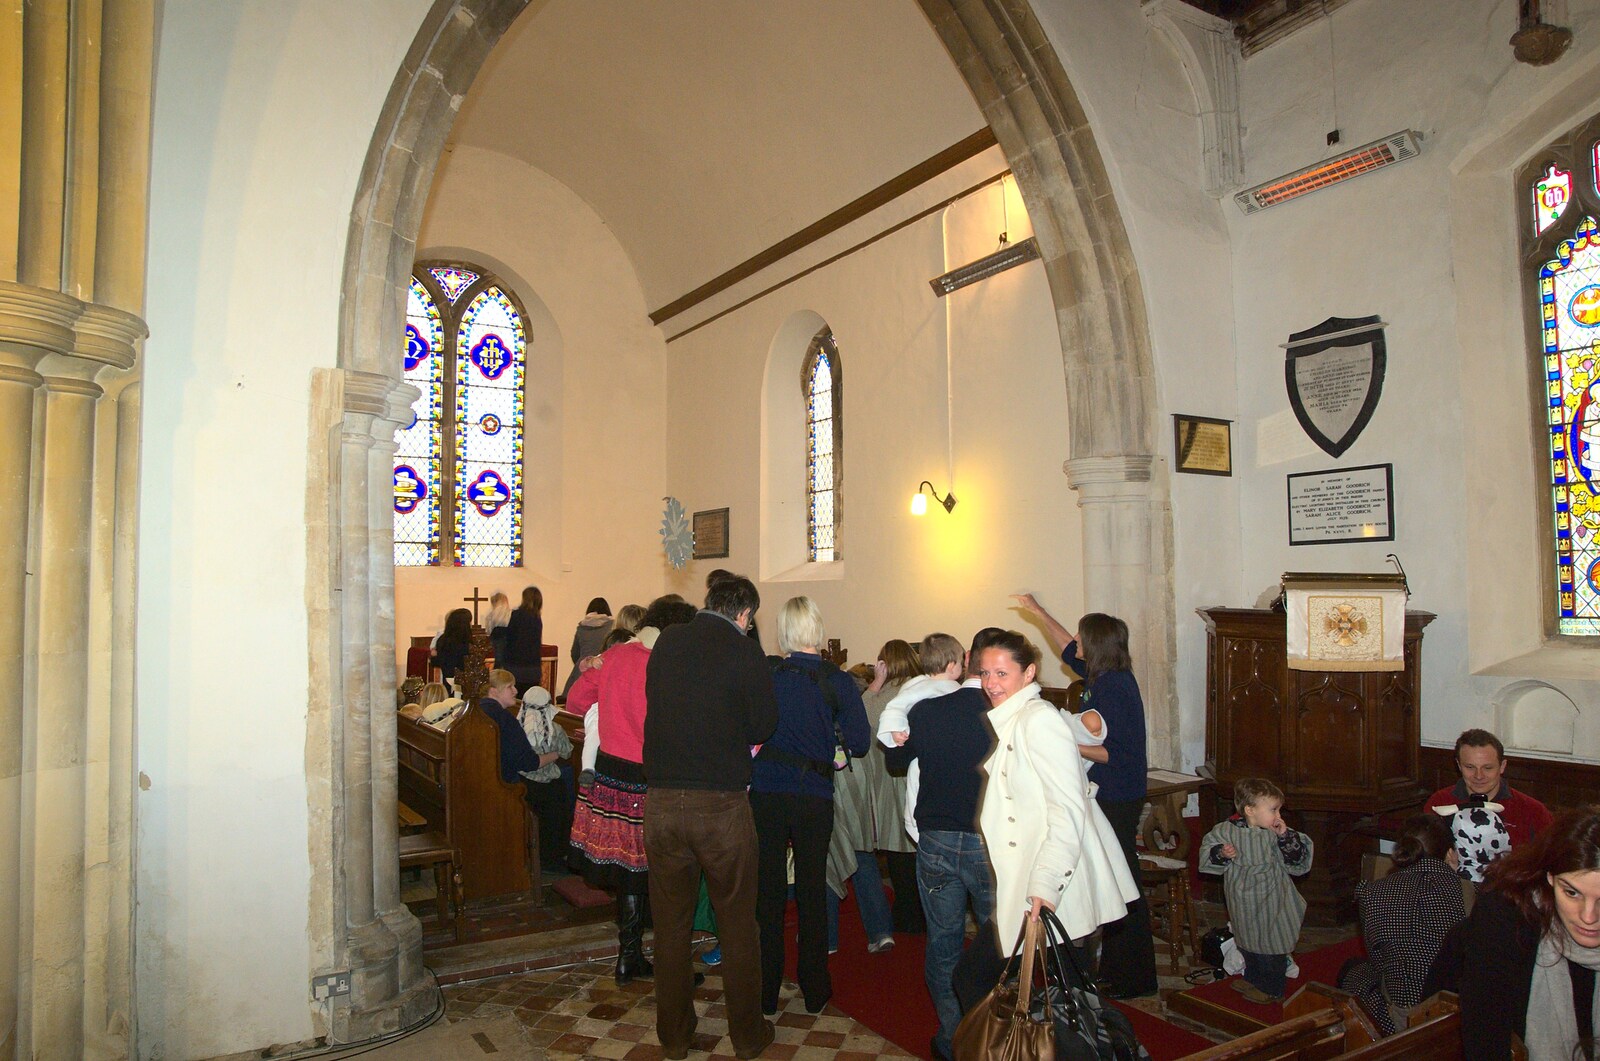 In St. Peter's church from Fred's First Nativity, St. Peter's Church, Palgrave, Suffolk - 8th December 2011